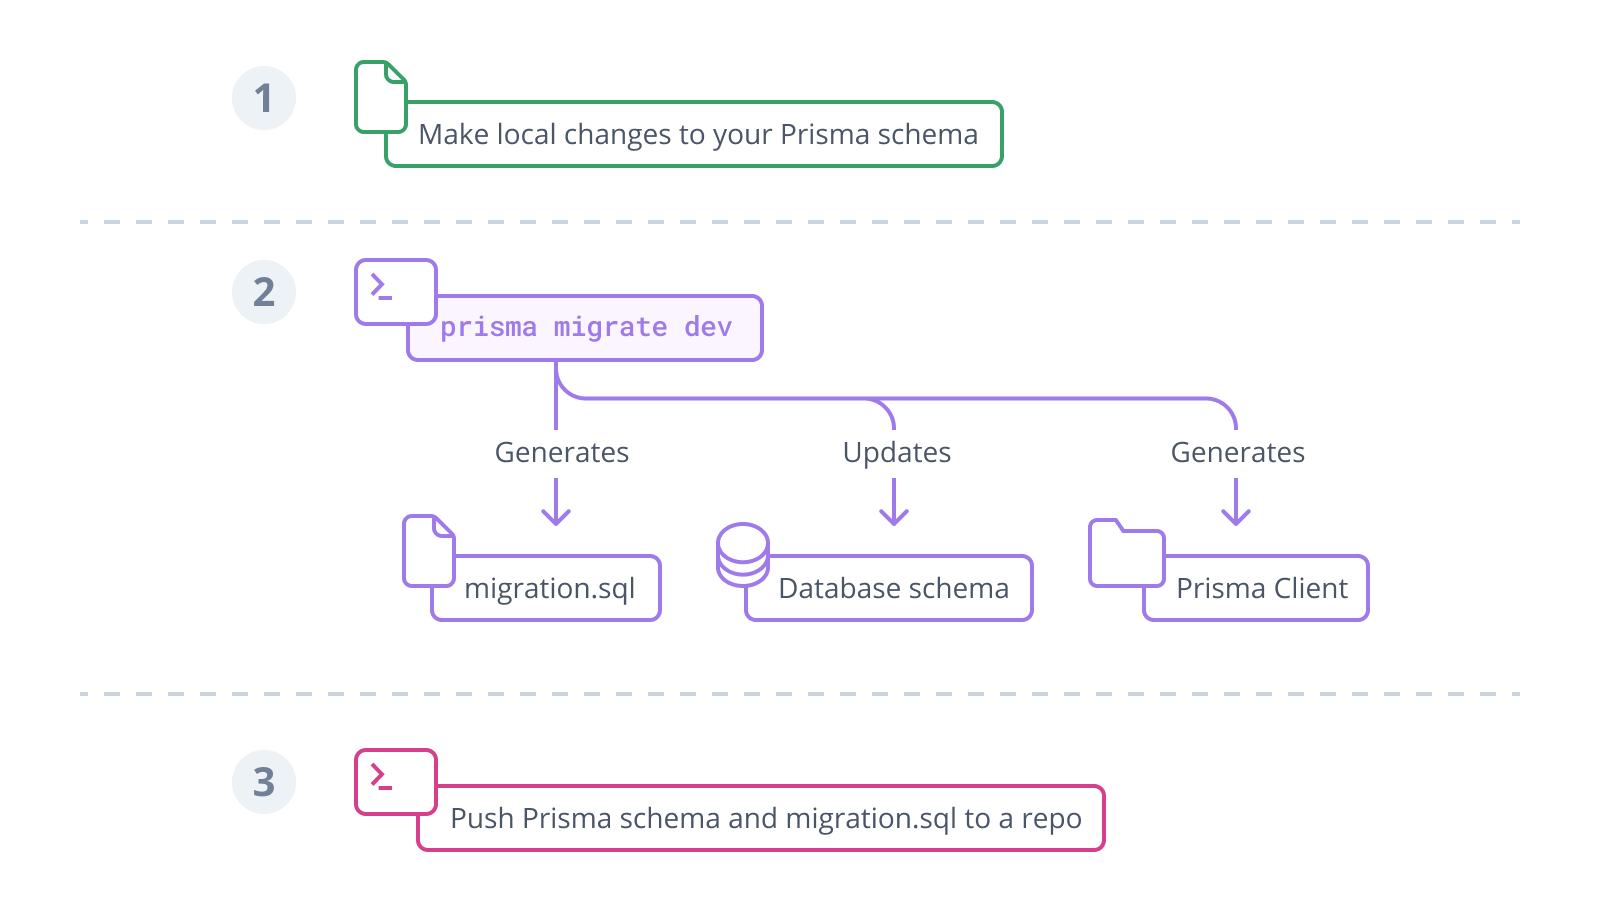 Typical workflow with Prisma Migrate